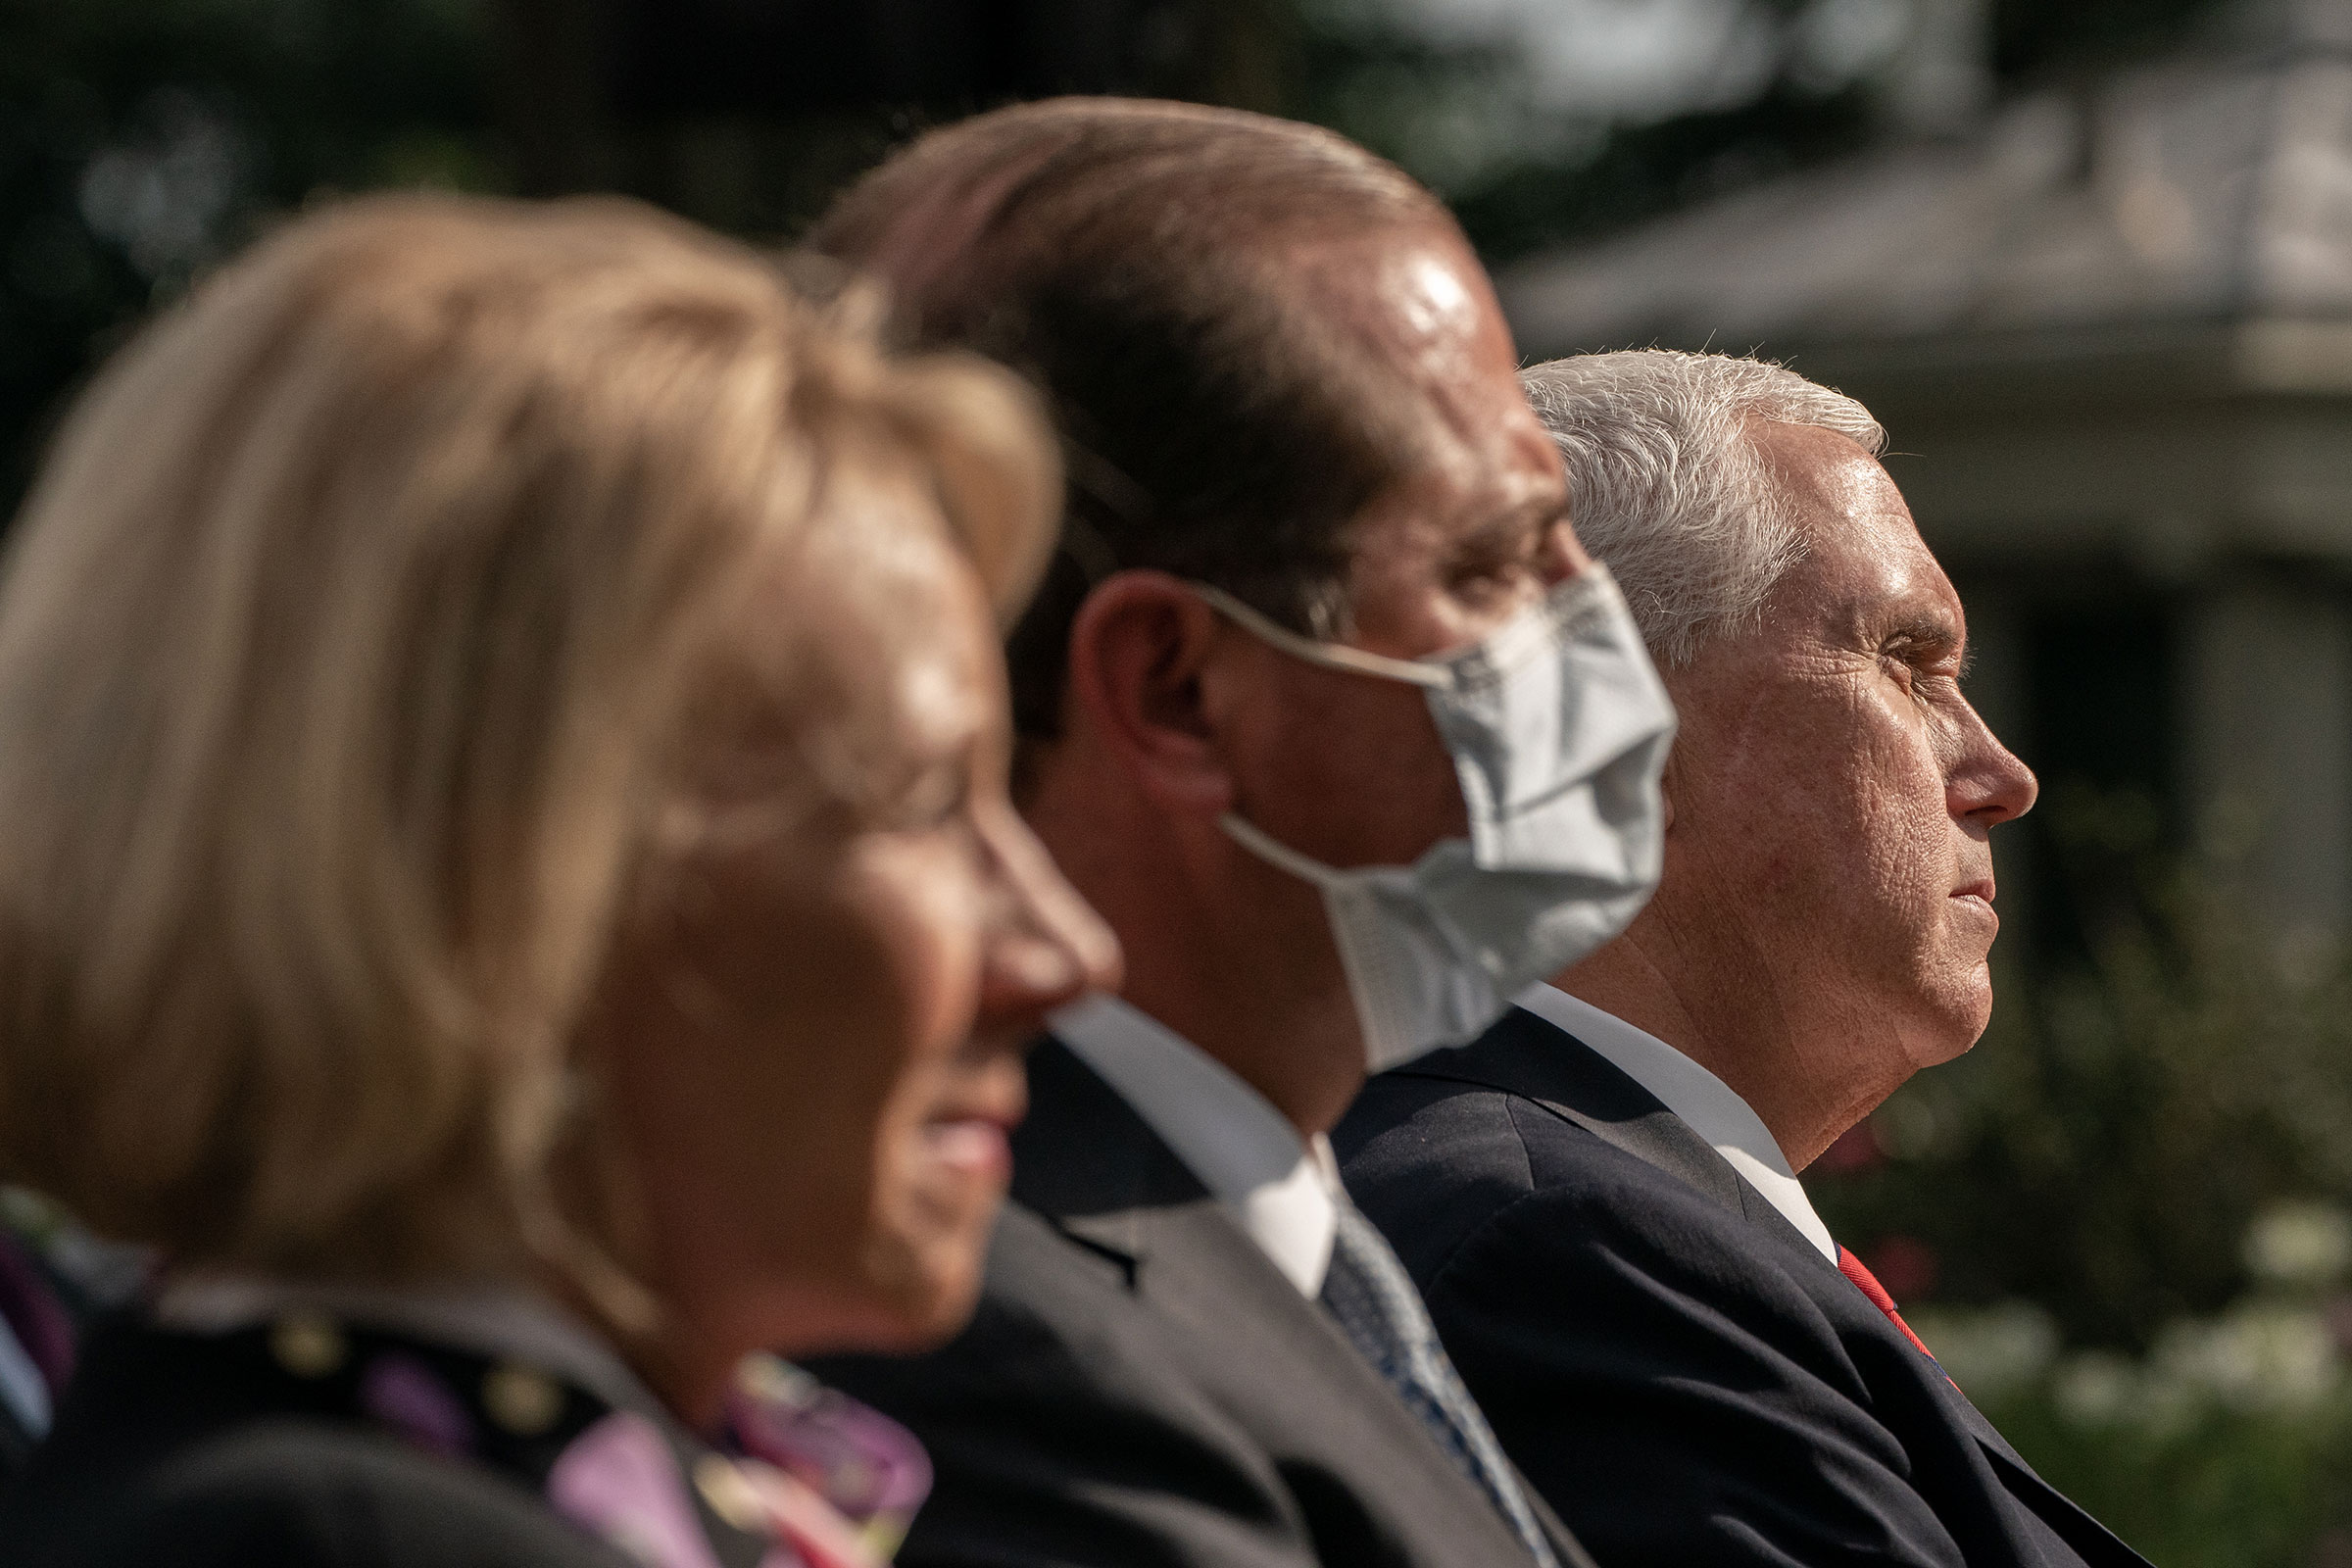 United States Vice President Mike Pence listens during an update by United States President Donald Trump on the nation's Coronavirus testing strategy in the Rose Garden of the White House, in Washington, Sept. 28, 2020. (Ken Cedeno—Sipa)